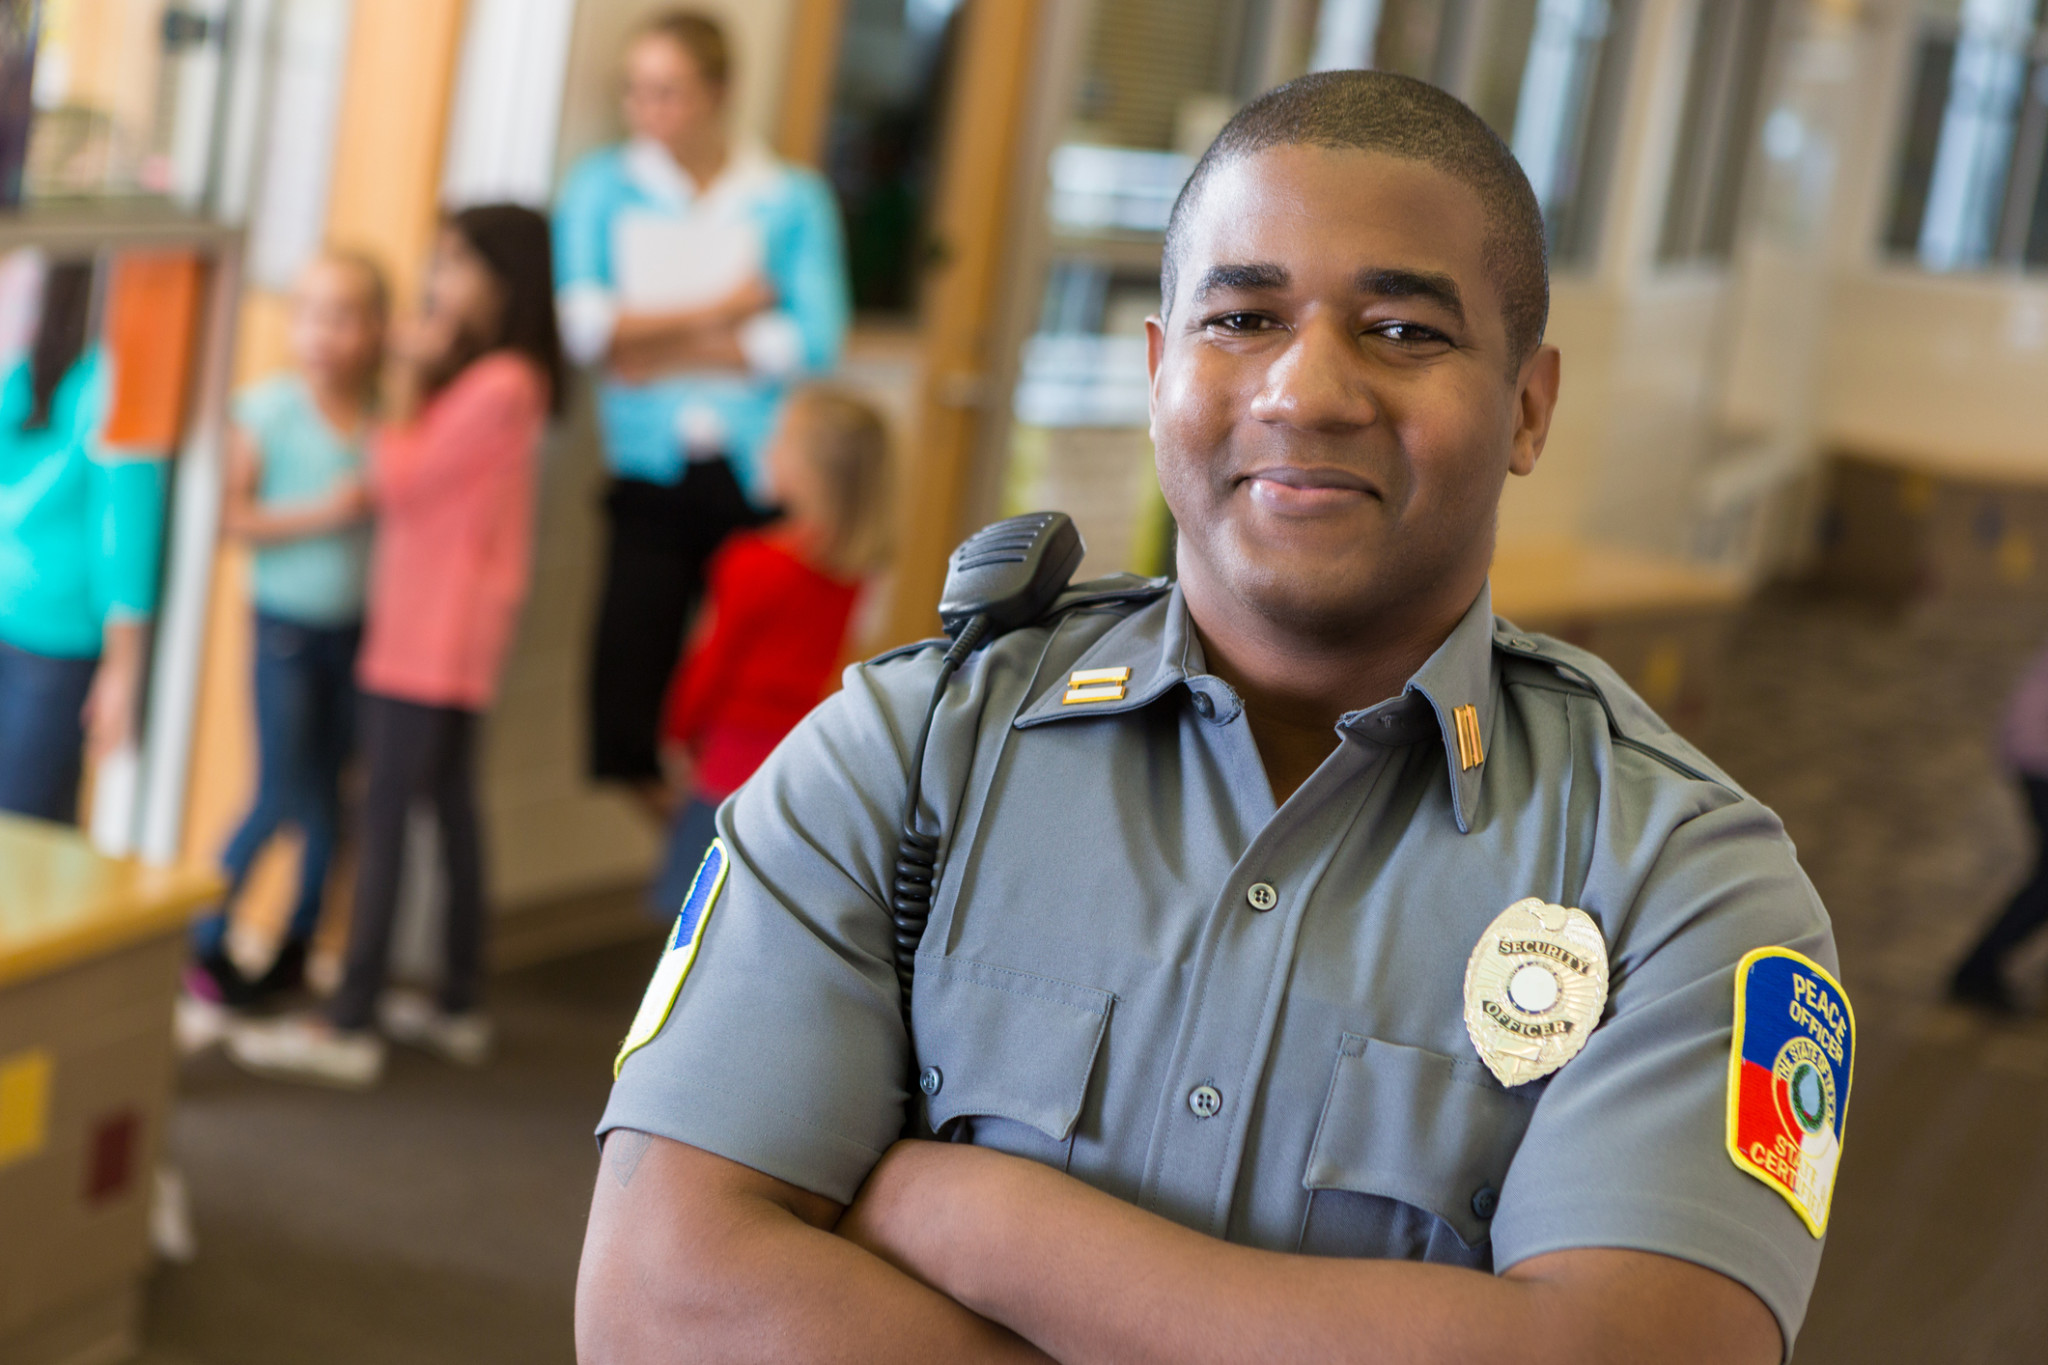 Insurance for School Security Guards 